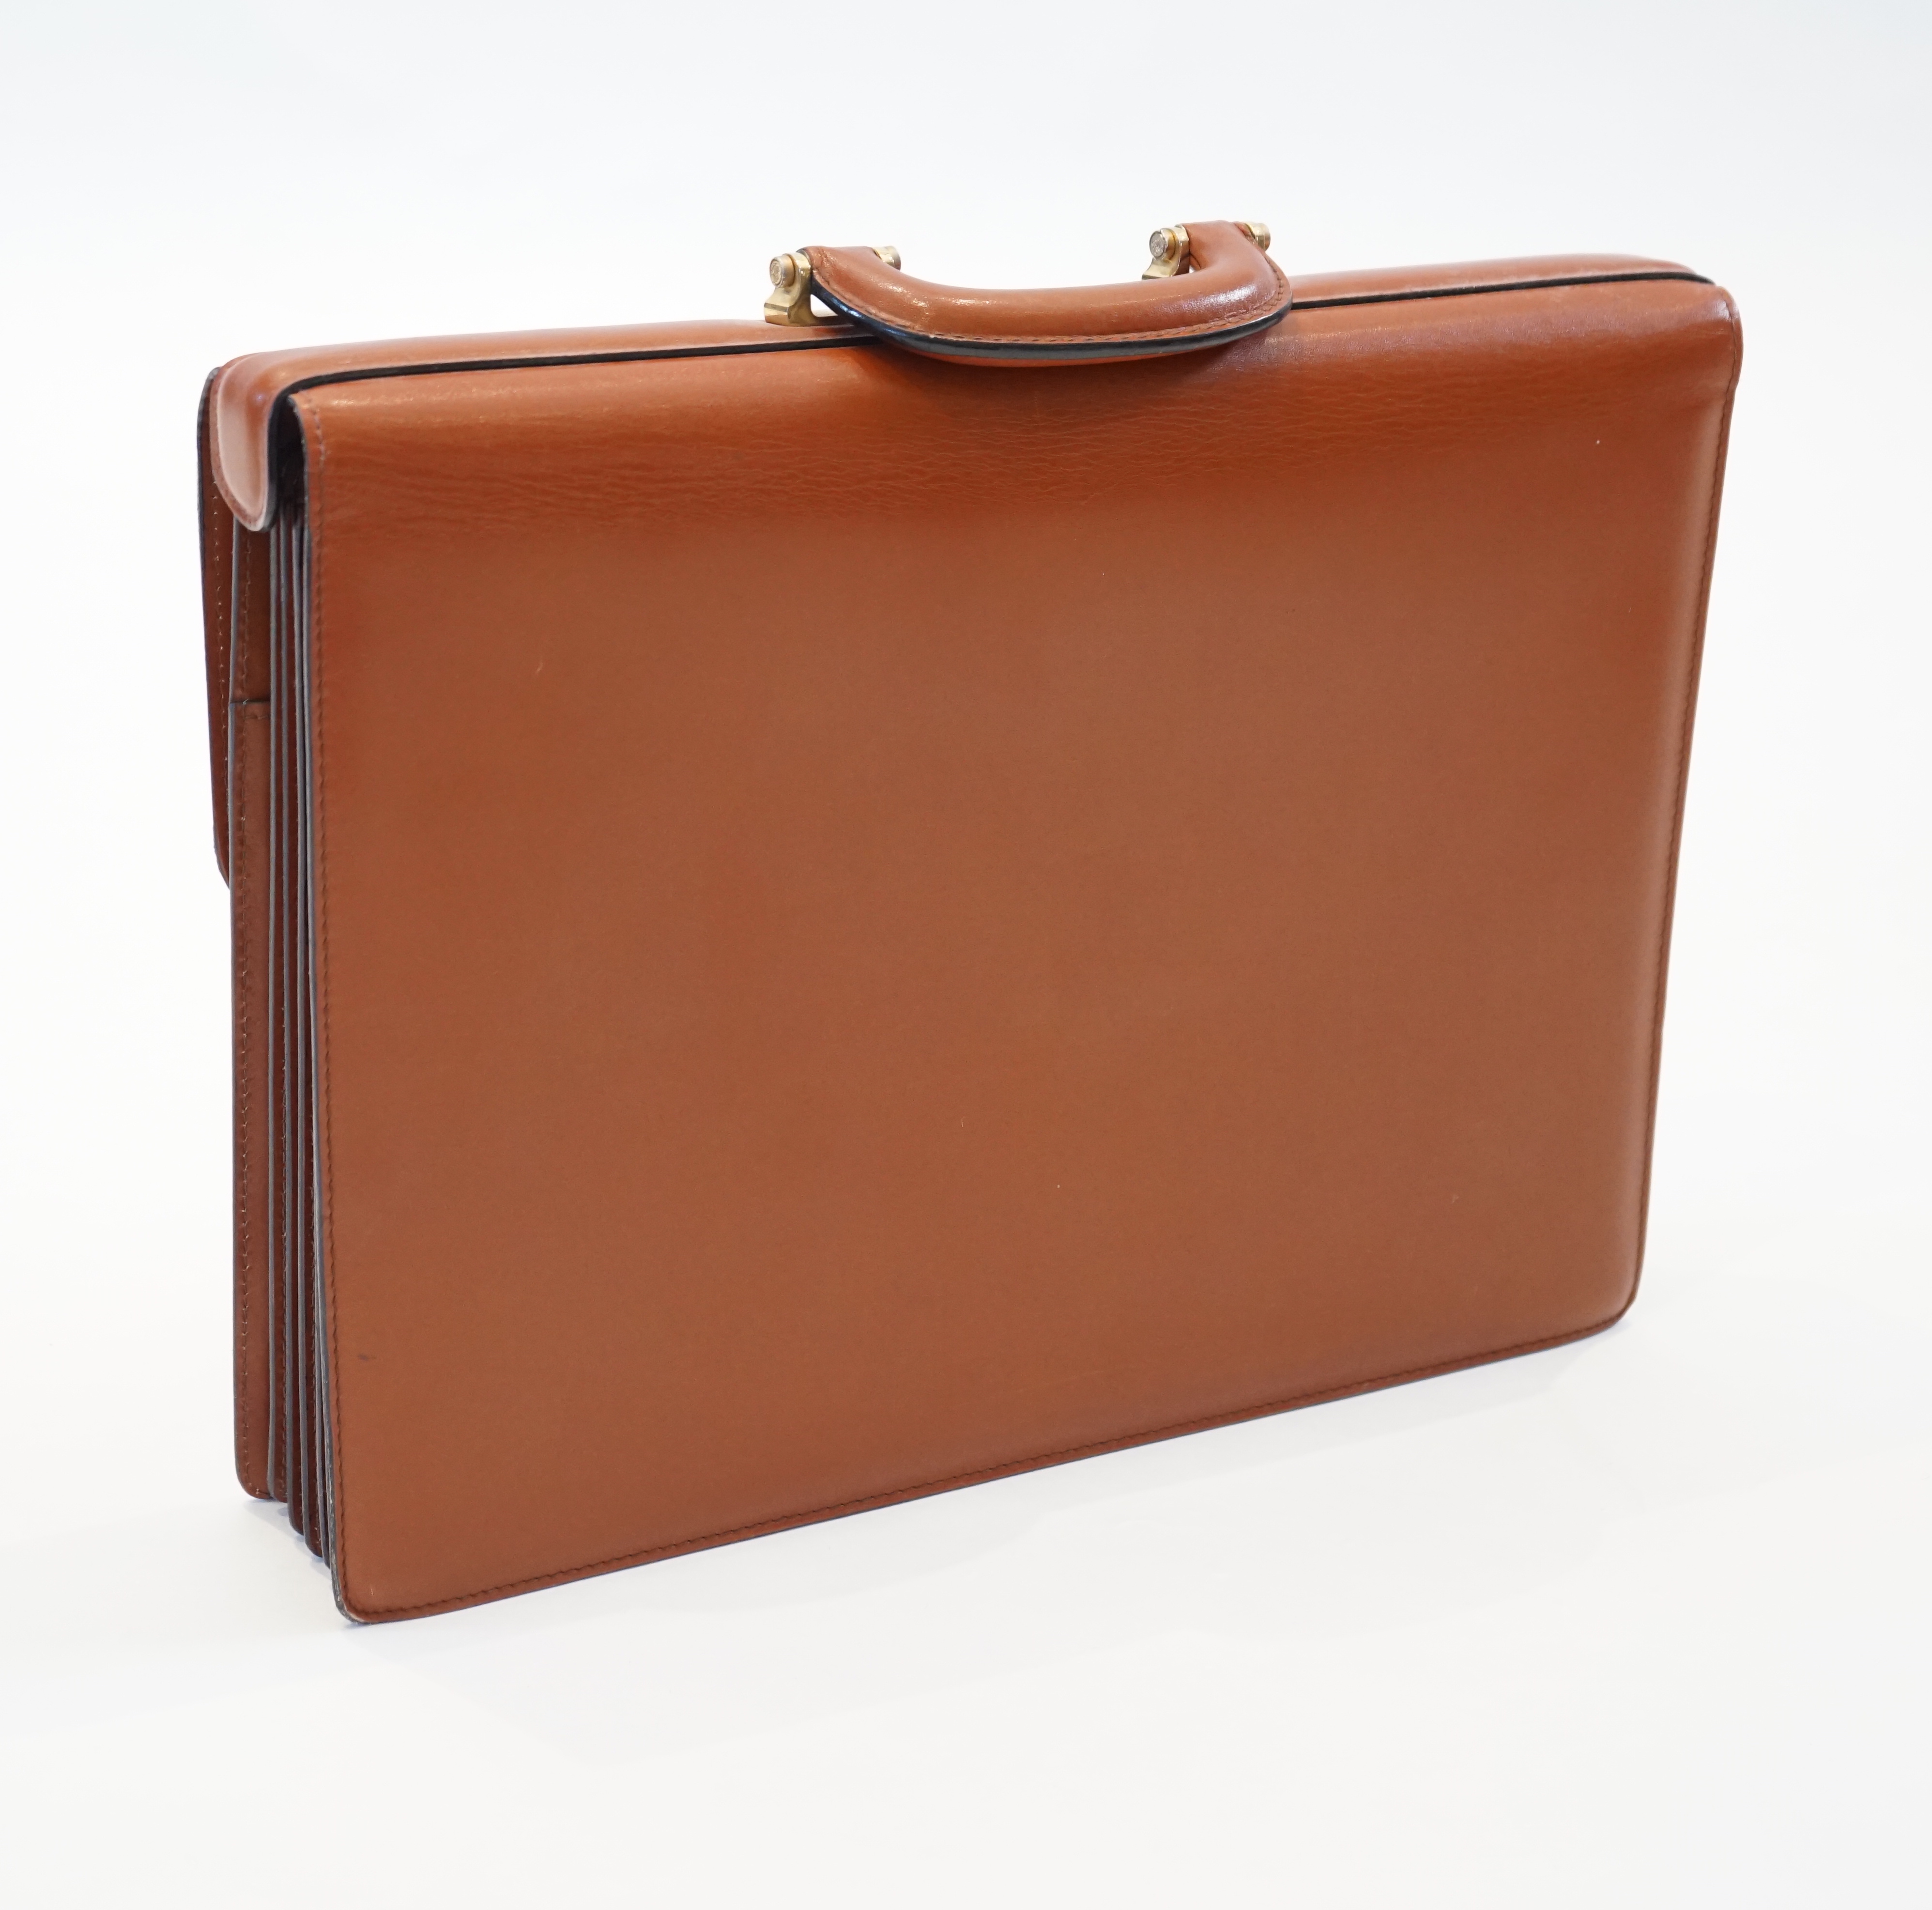 A gentlemen's Loewe brown tan leather briefcase with gold plated metalware, five division interior - Image 4 of 12